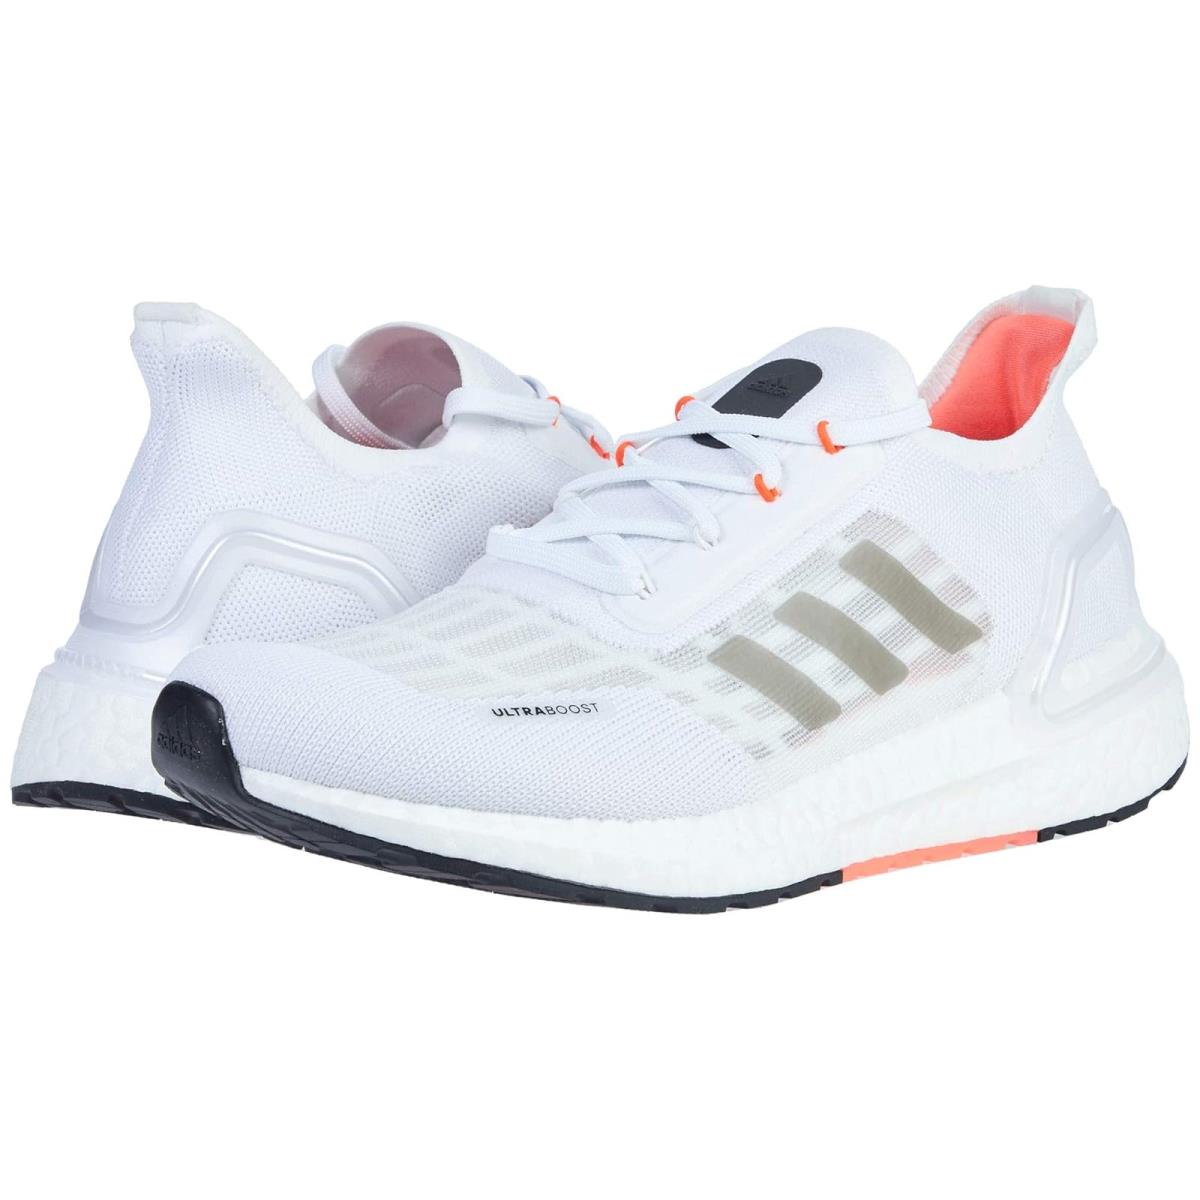 Woman`s Sneakers Athletic Shoes Adidas Running Ultraboost S.rdy Footwear White/Core Black/Solar Red